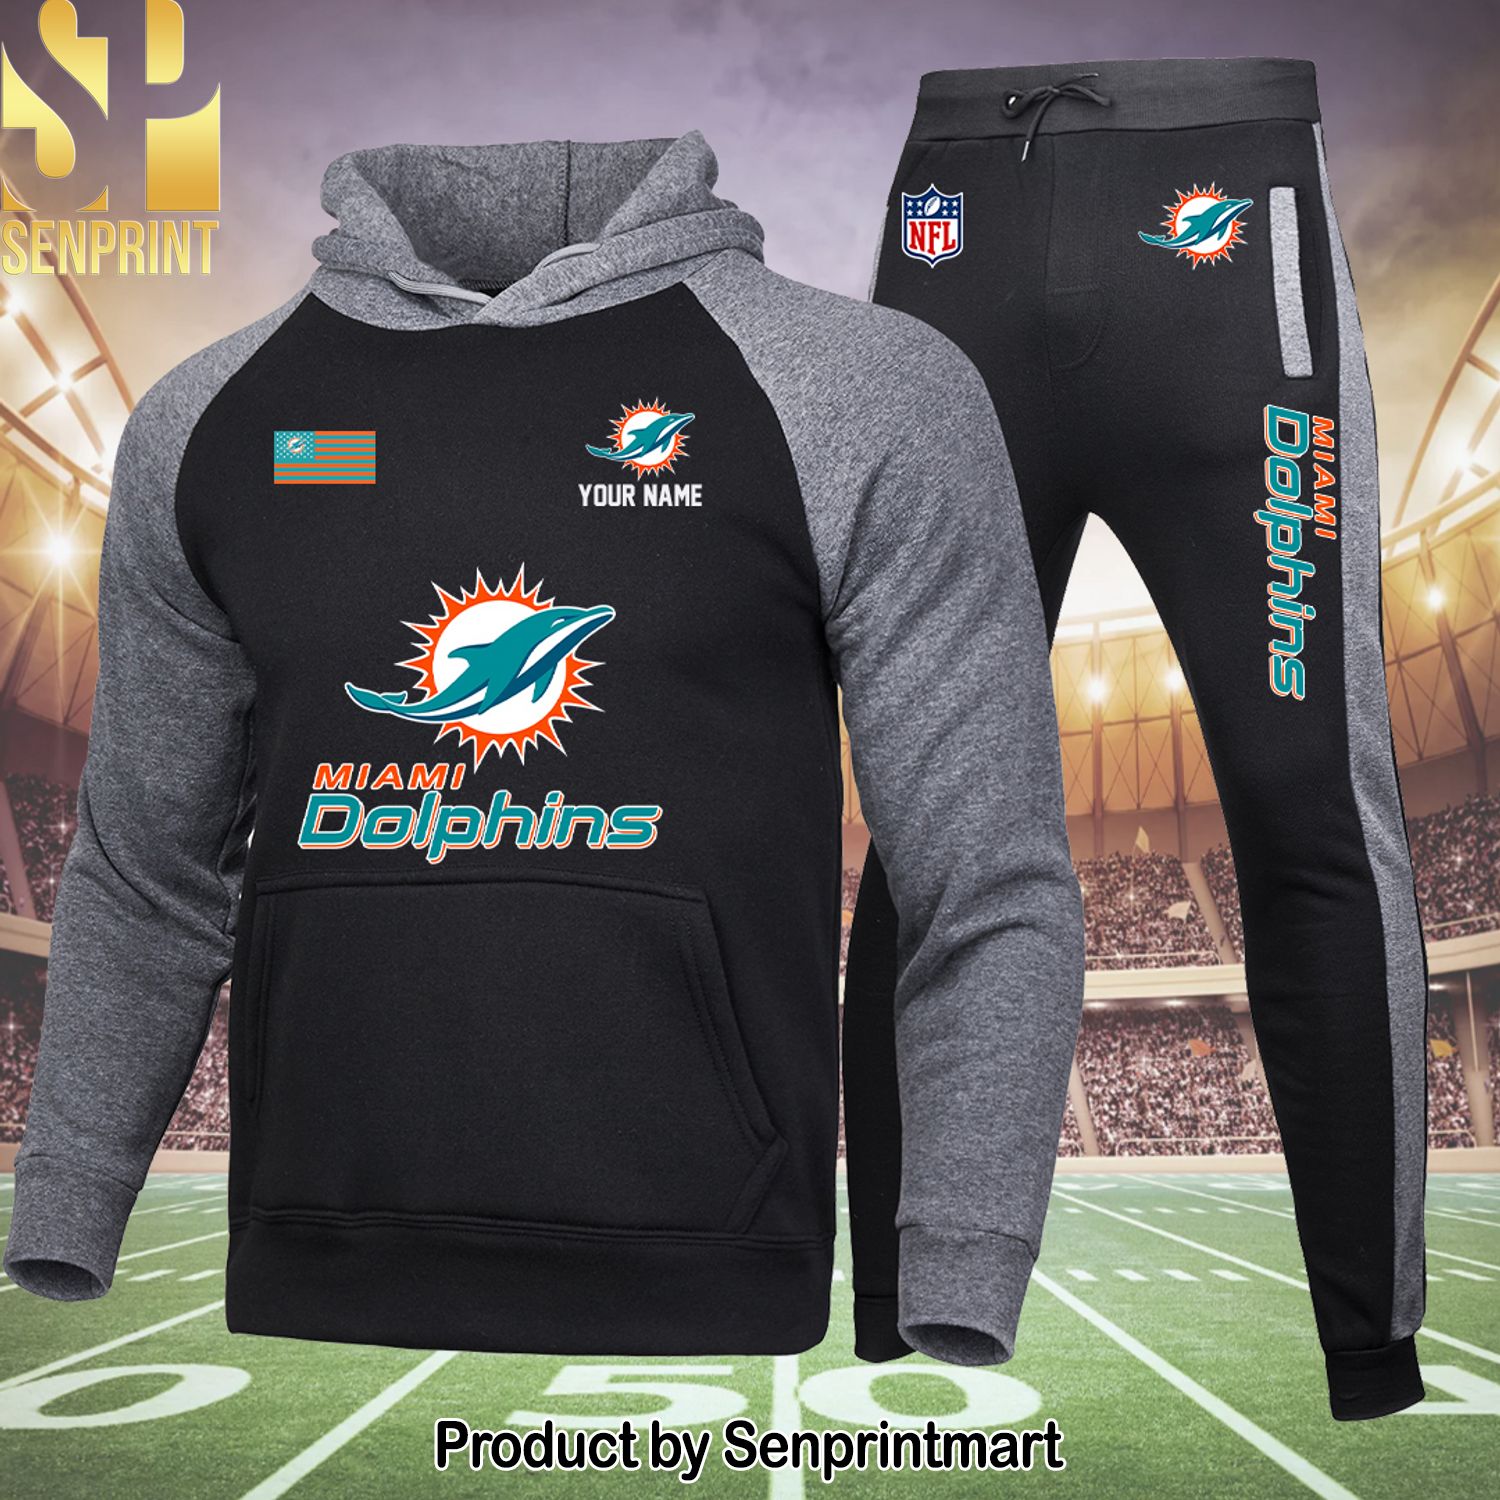 Miami Dolphins Classic All Over Printed Shirt and Pants